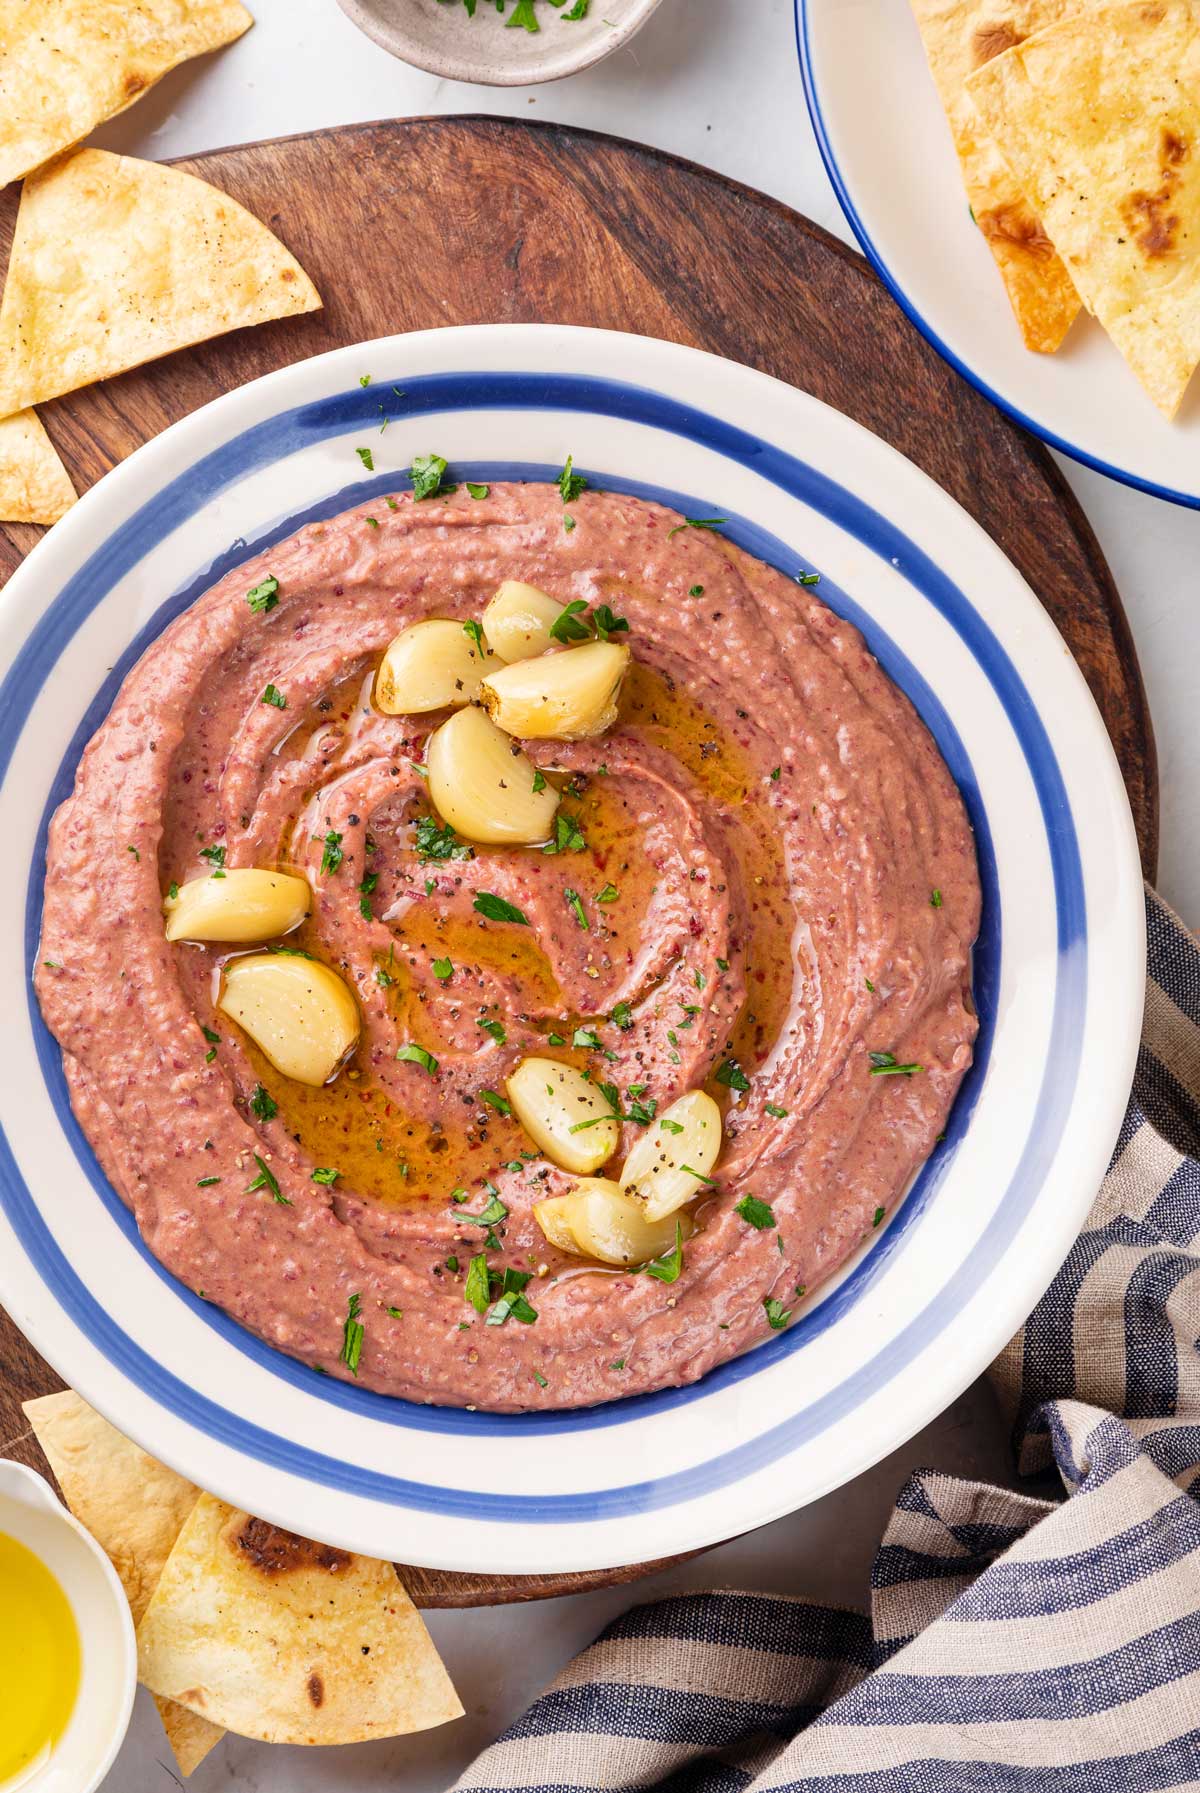 Red bean hummus with roasted garlic in a serving bowl